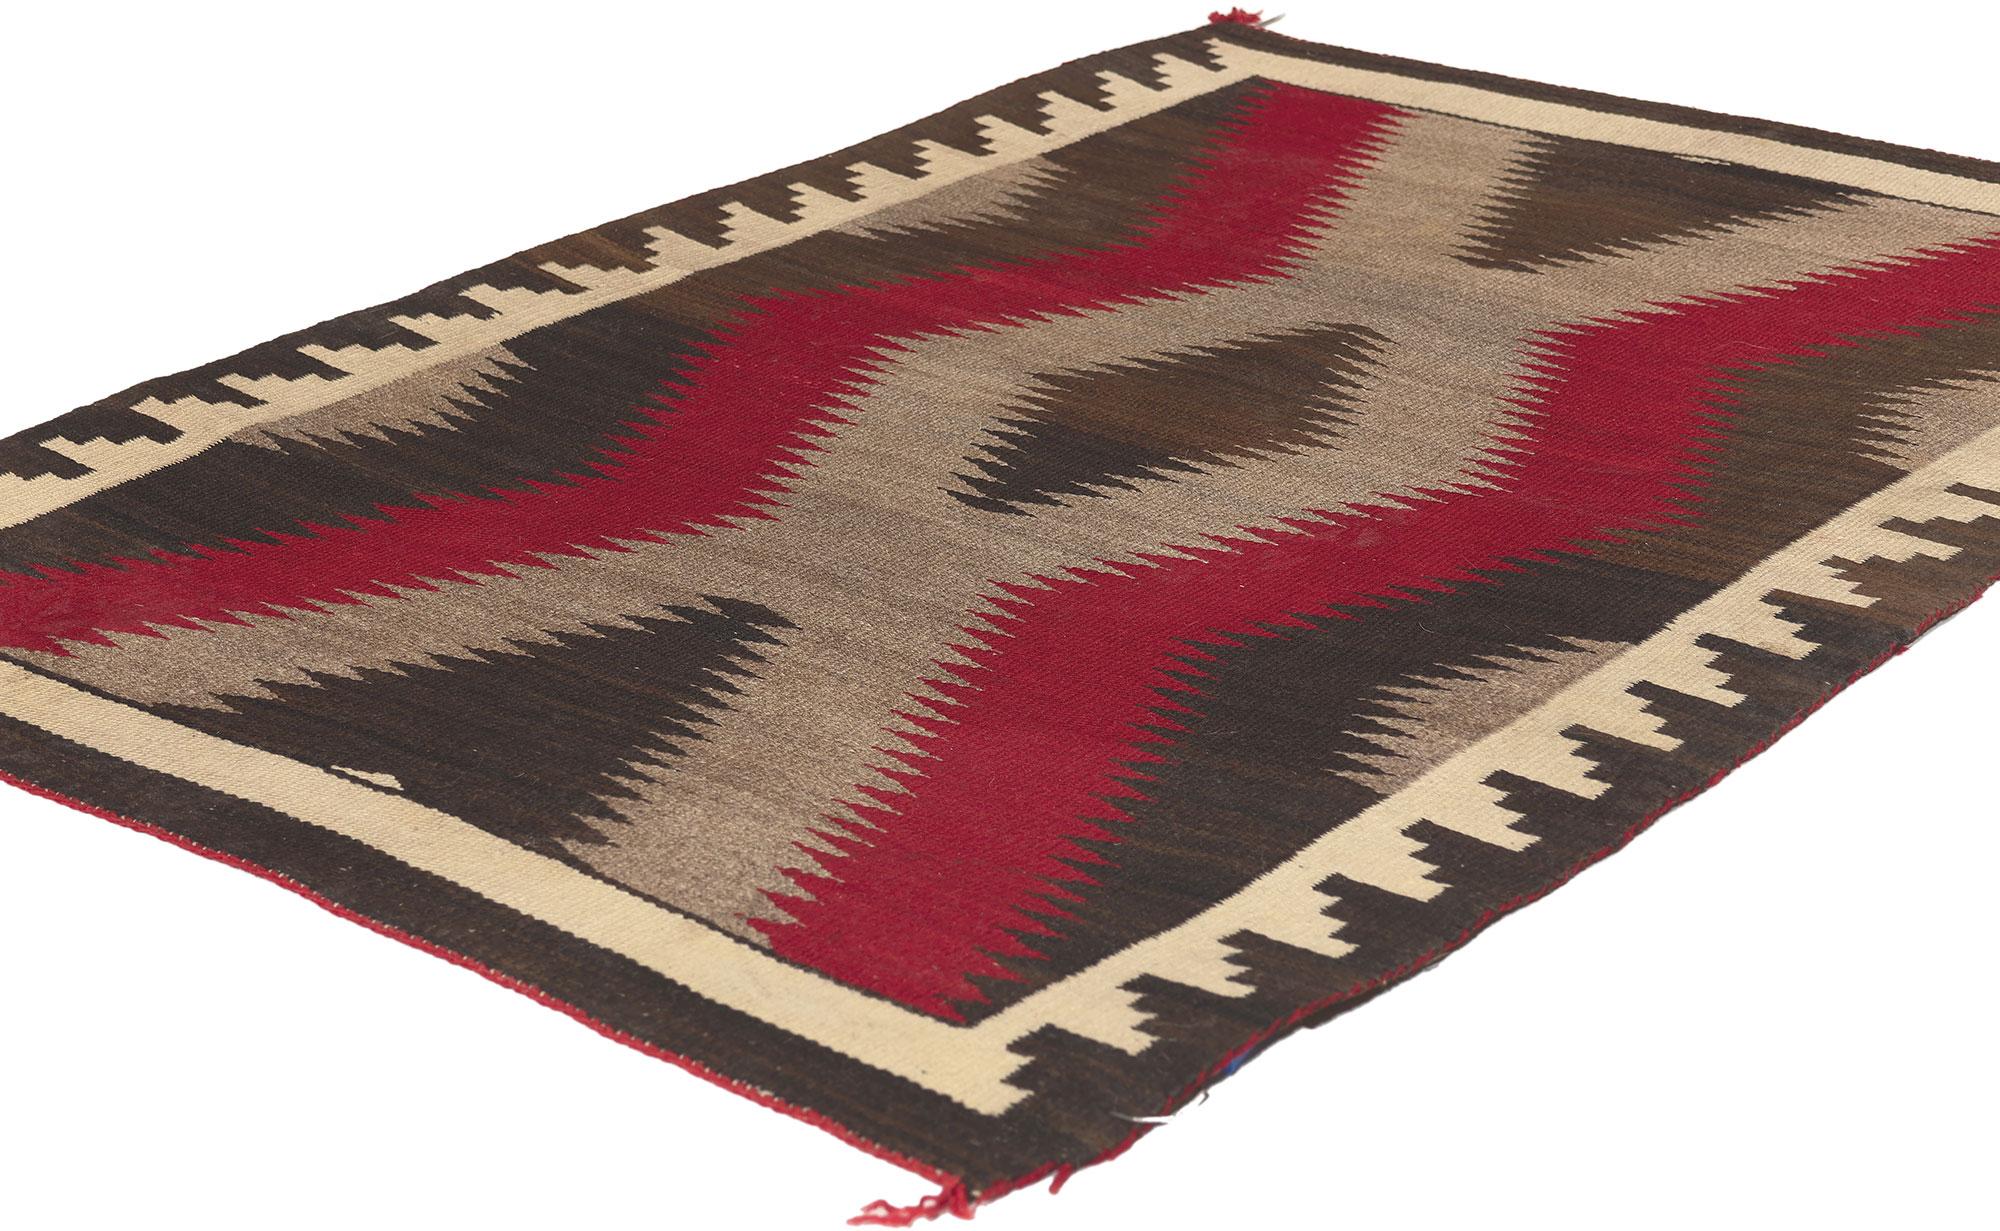 78626 Antique Ganado Navajo Rug, 02'04 x 03'06.
Modern Southwest style meets luxury lodge in this handwoven Native American Navajo rug. The eye-catching Ganado design and earthy colorway woven into this piece work together creating an ultra cozy